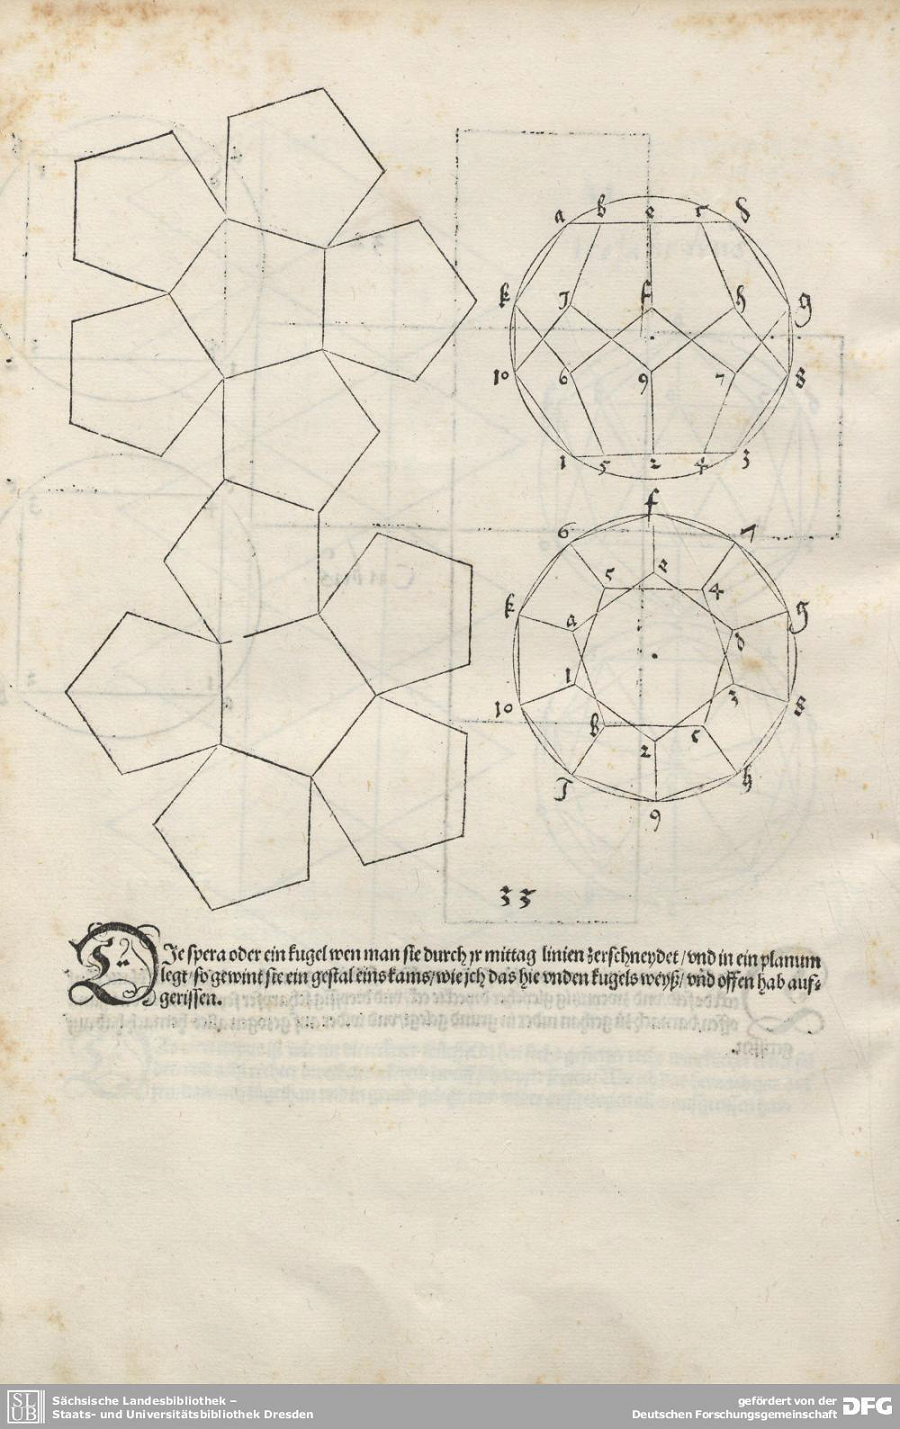 A net of a dodecahedron as drawn by Albrecht Dürer.